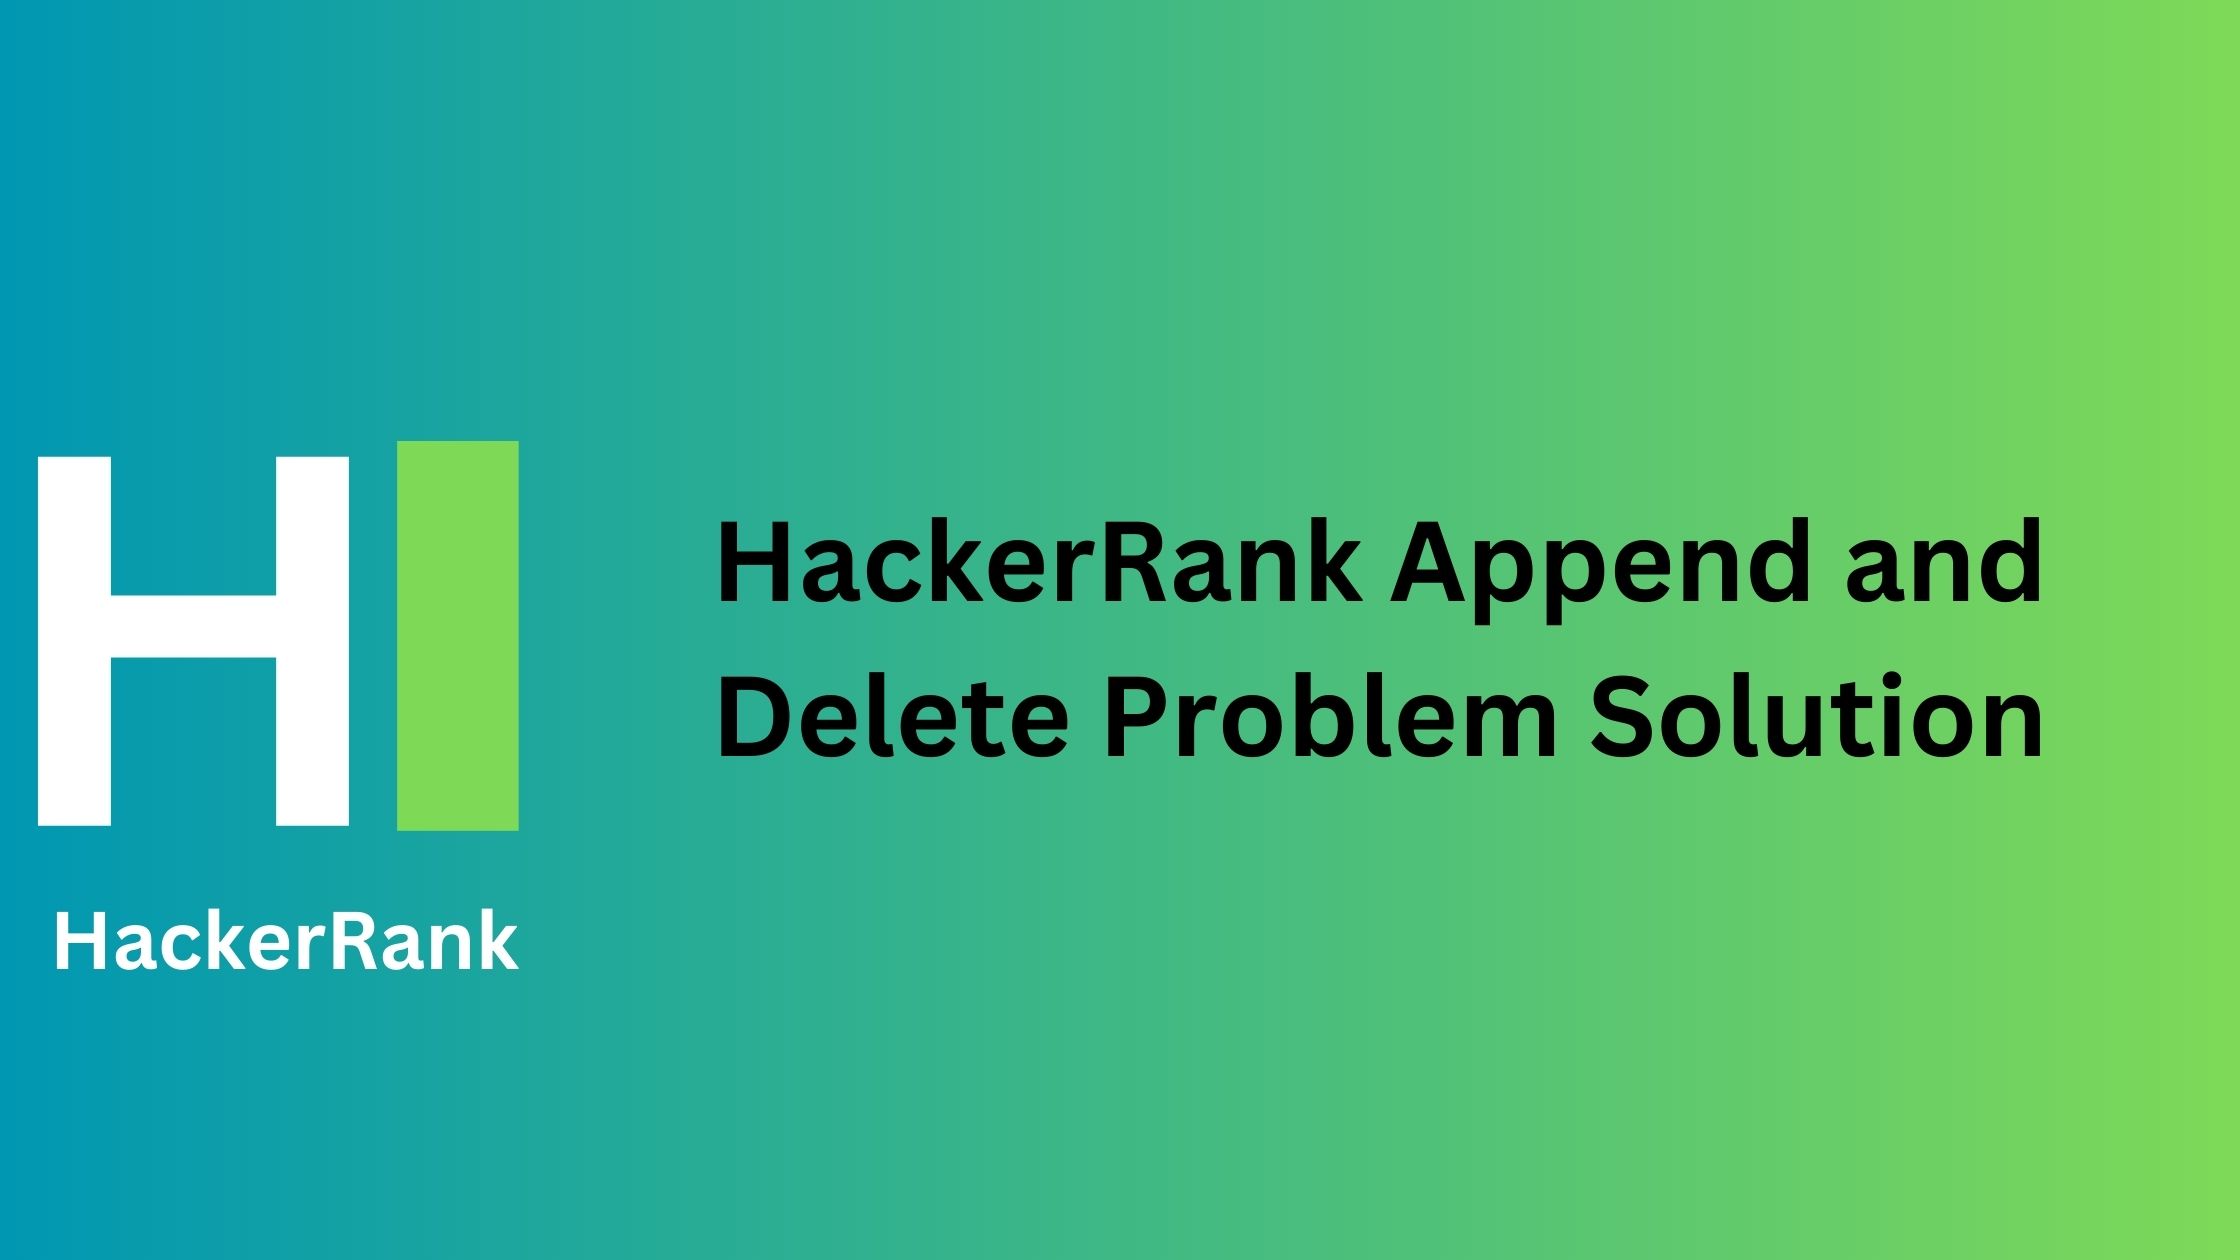 HackerRank Append and Delete Problem Solution